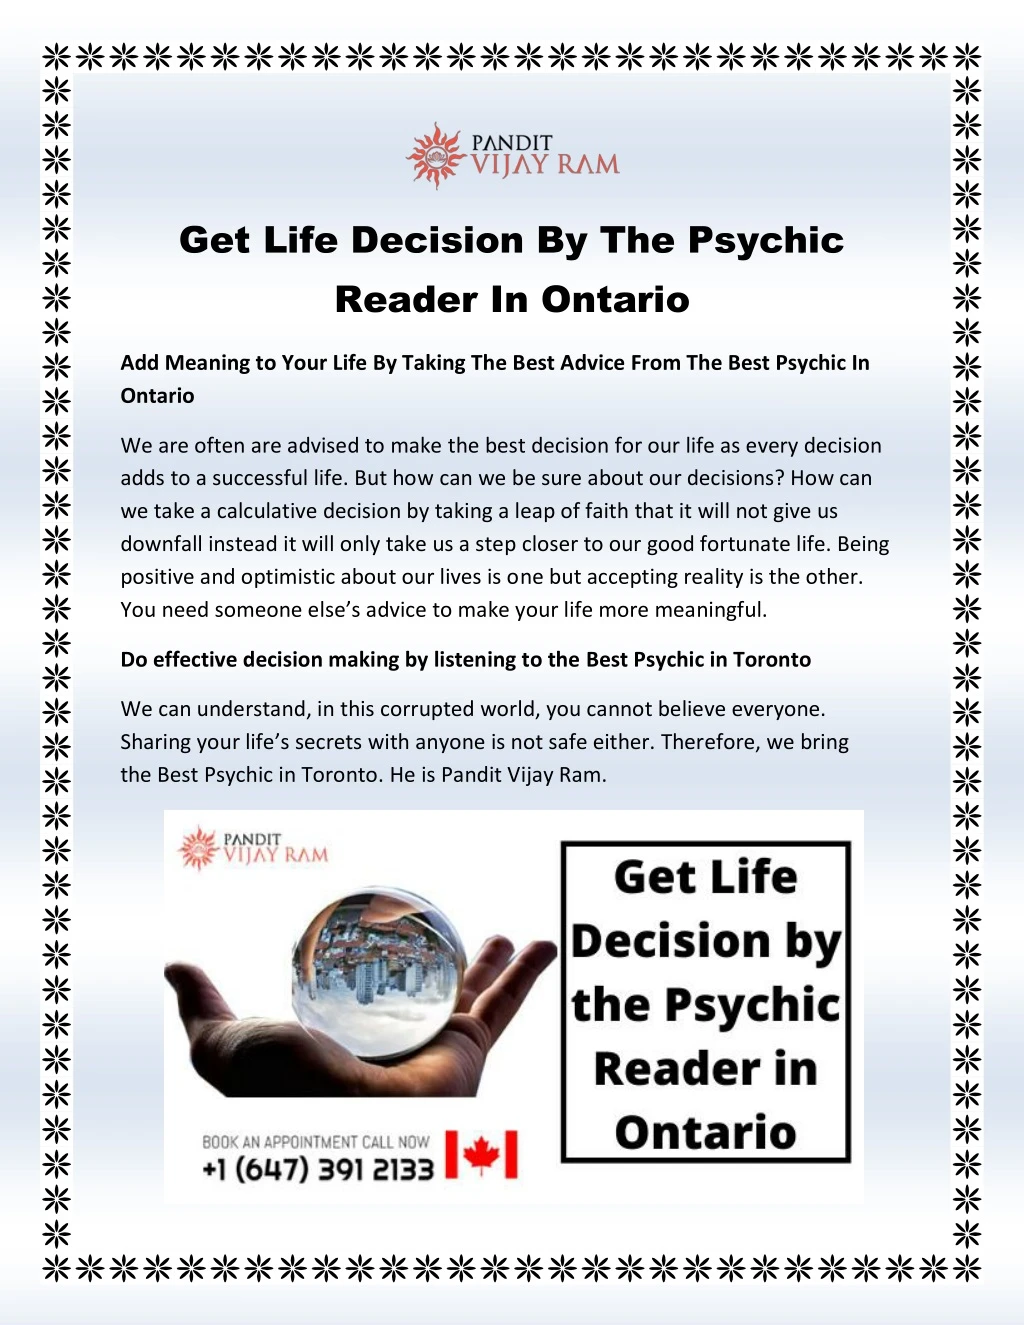 get life decision by the psychic reader in ontario